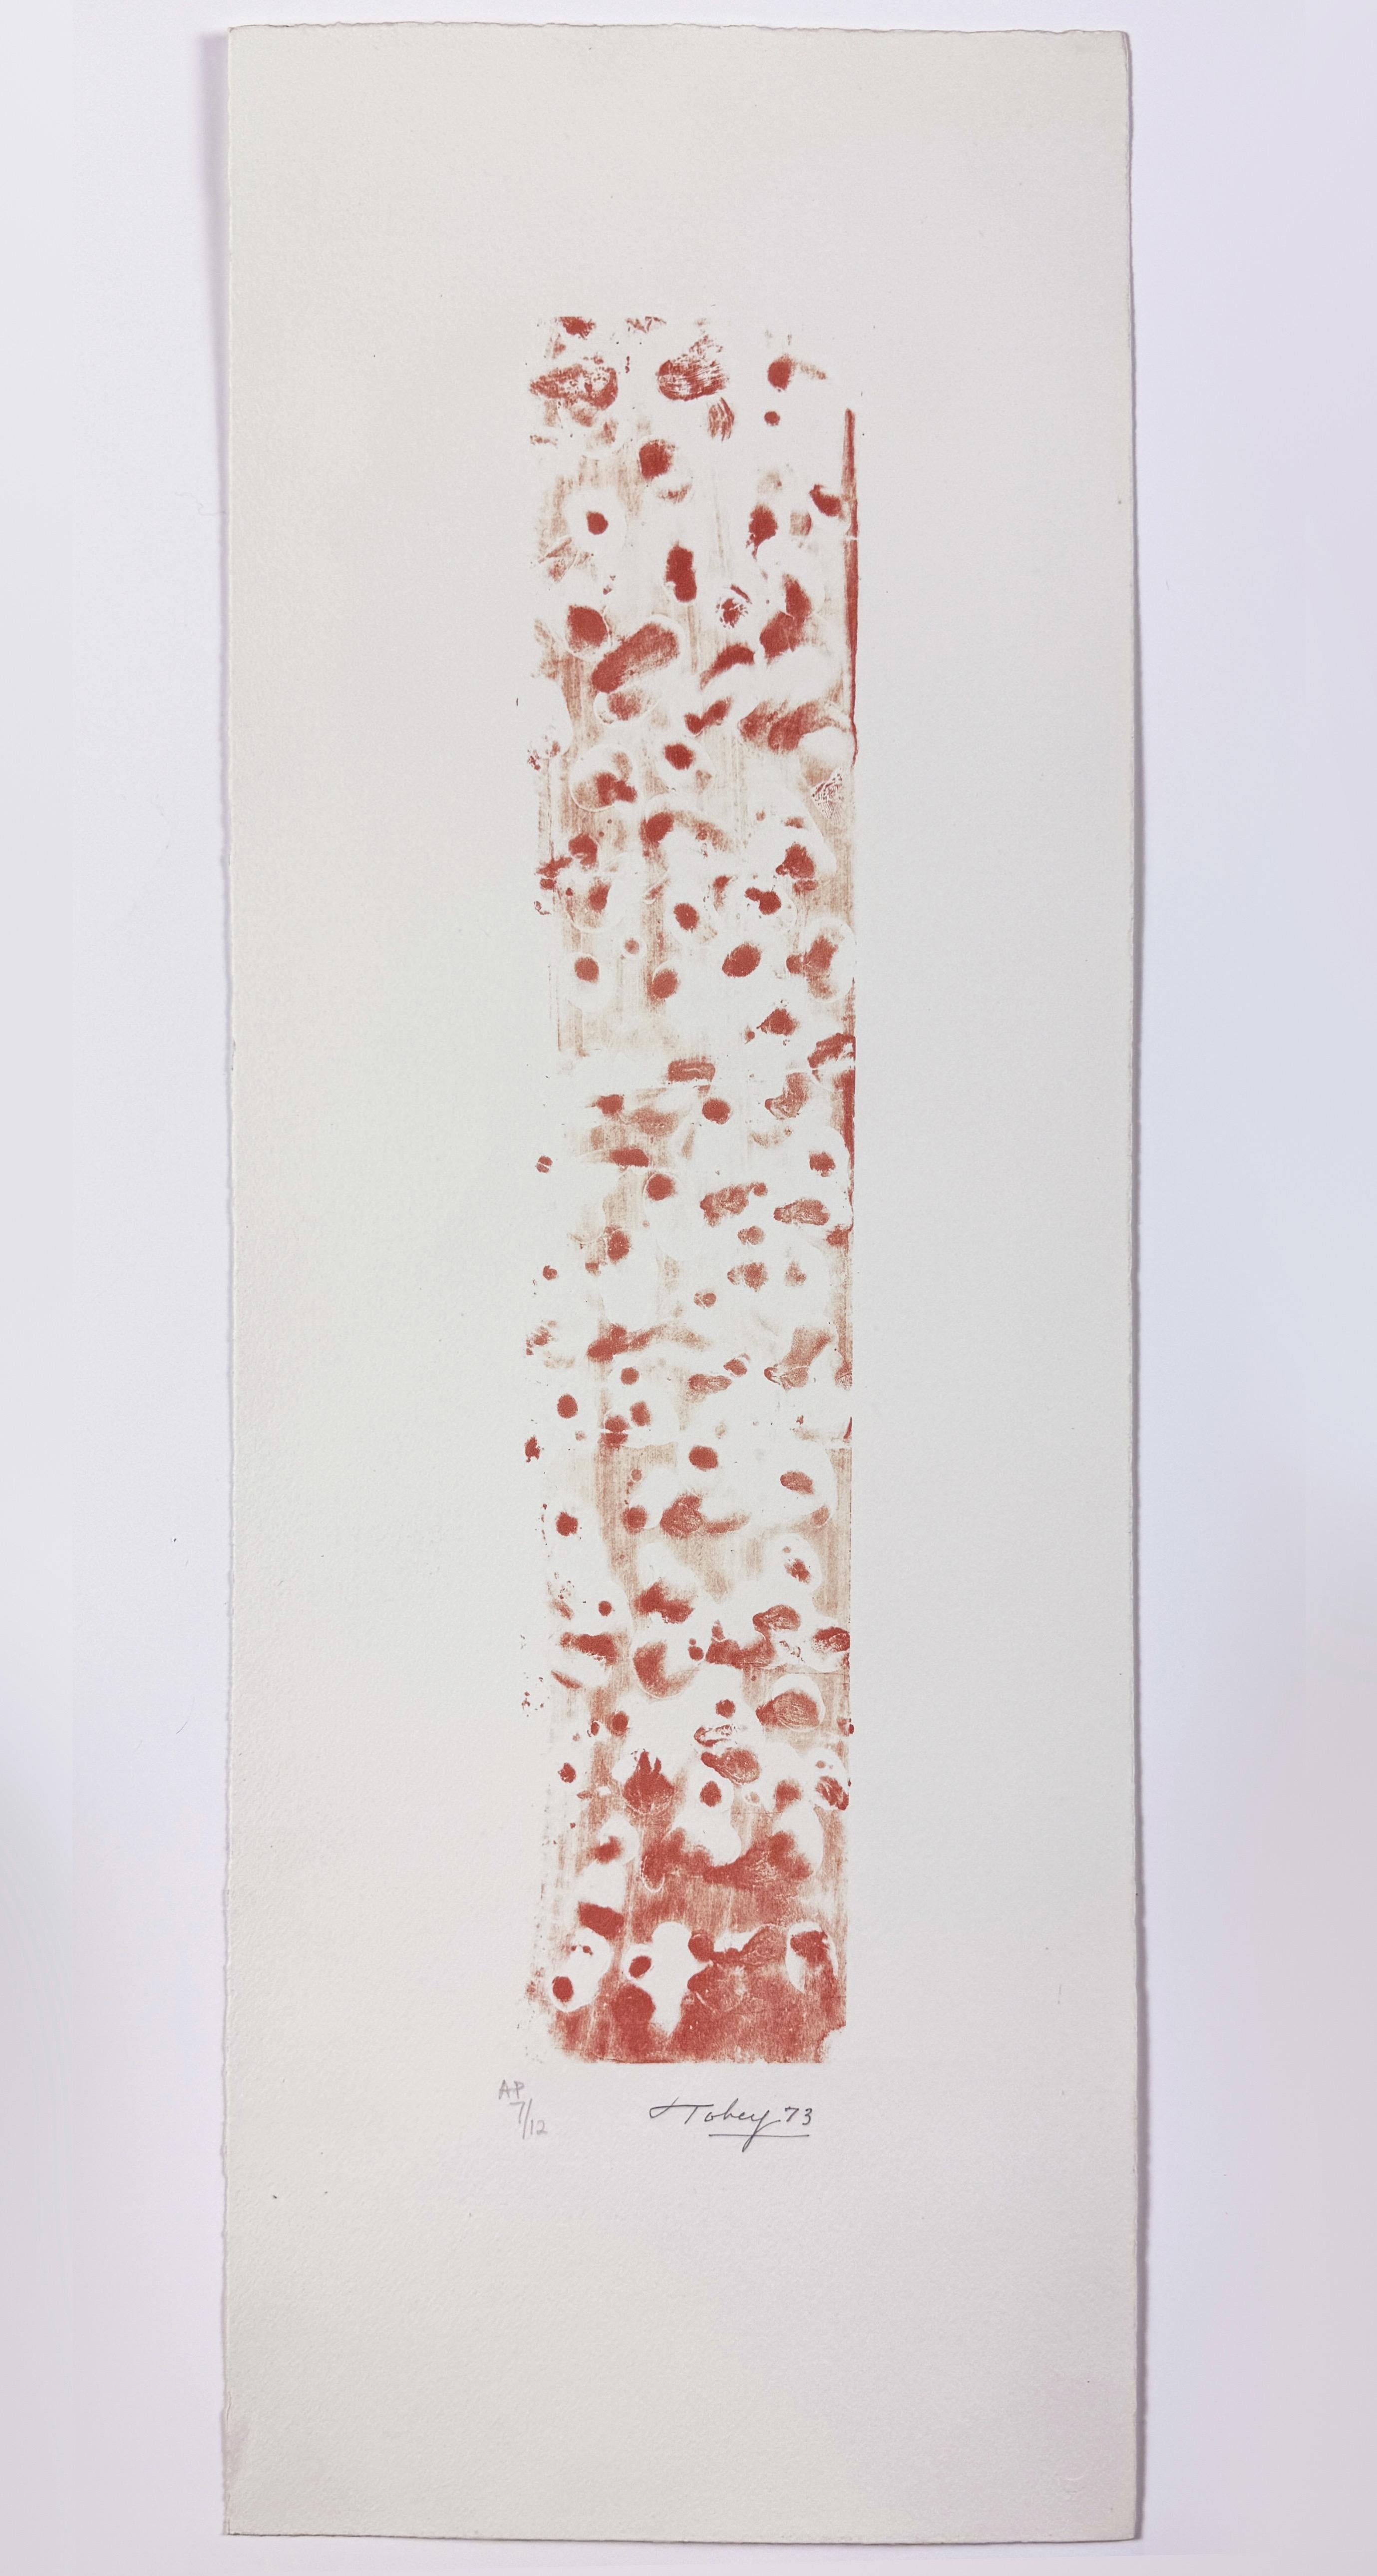 An expressive, moody abstract composition in red, with Mark Tobey’s soft, calligraphy-inspired mark-making reminiscent of water and bubbles flowing upward.

Mark Tobey, Underwater Fragment (red) 1973
sheet 26 15/16 in x 9 ¾ in / 68.42 cm x 24.77